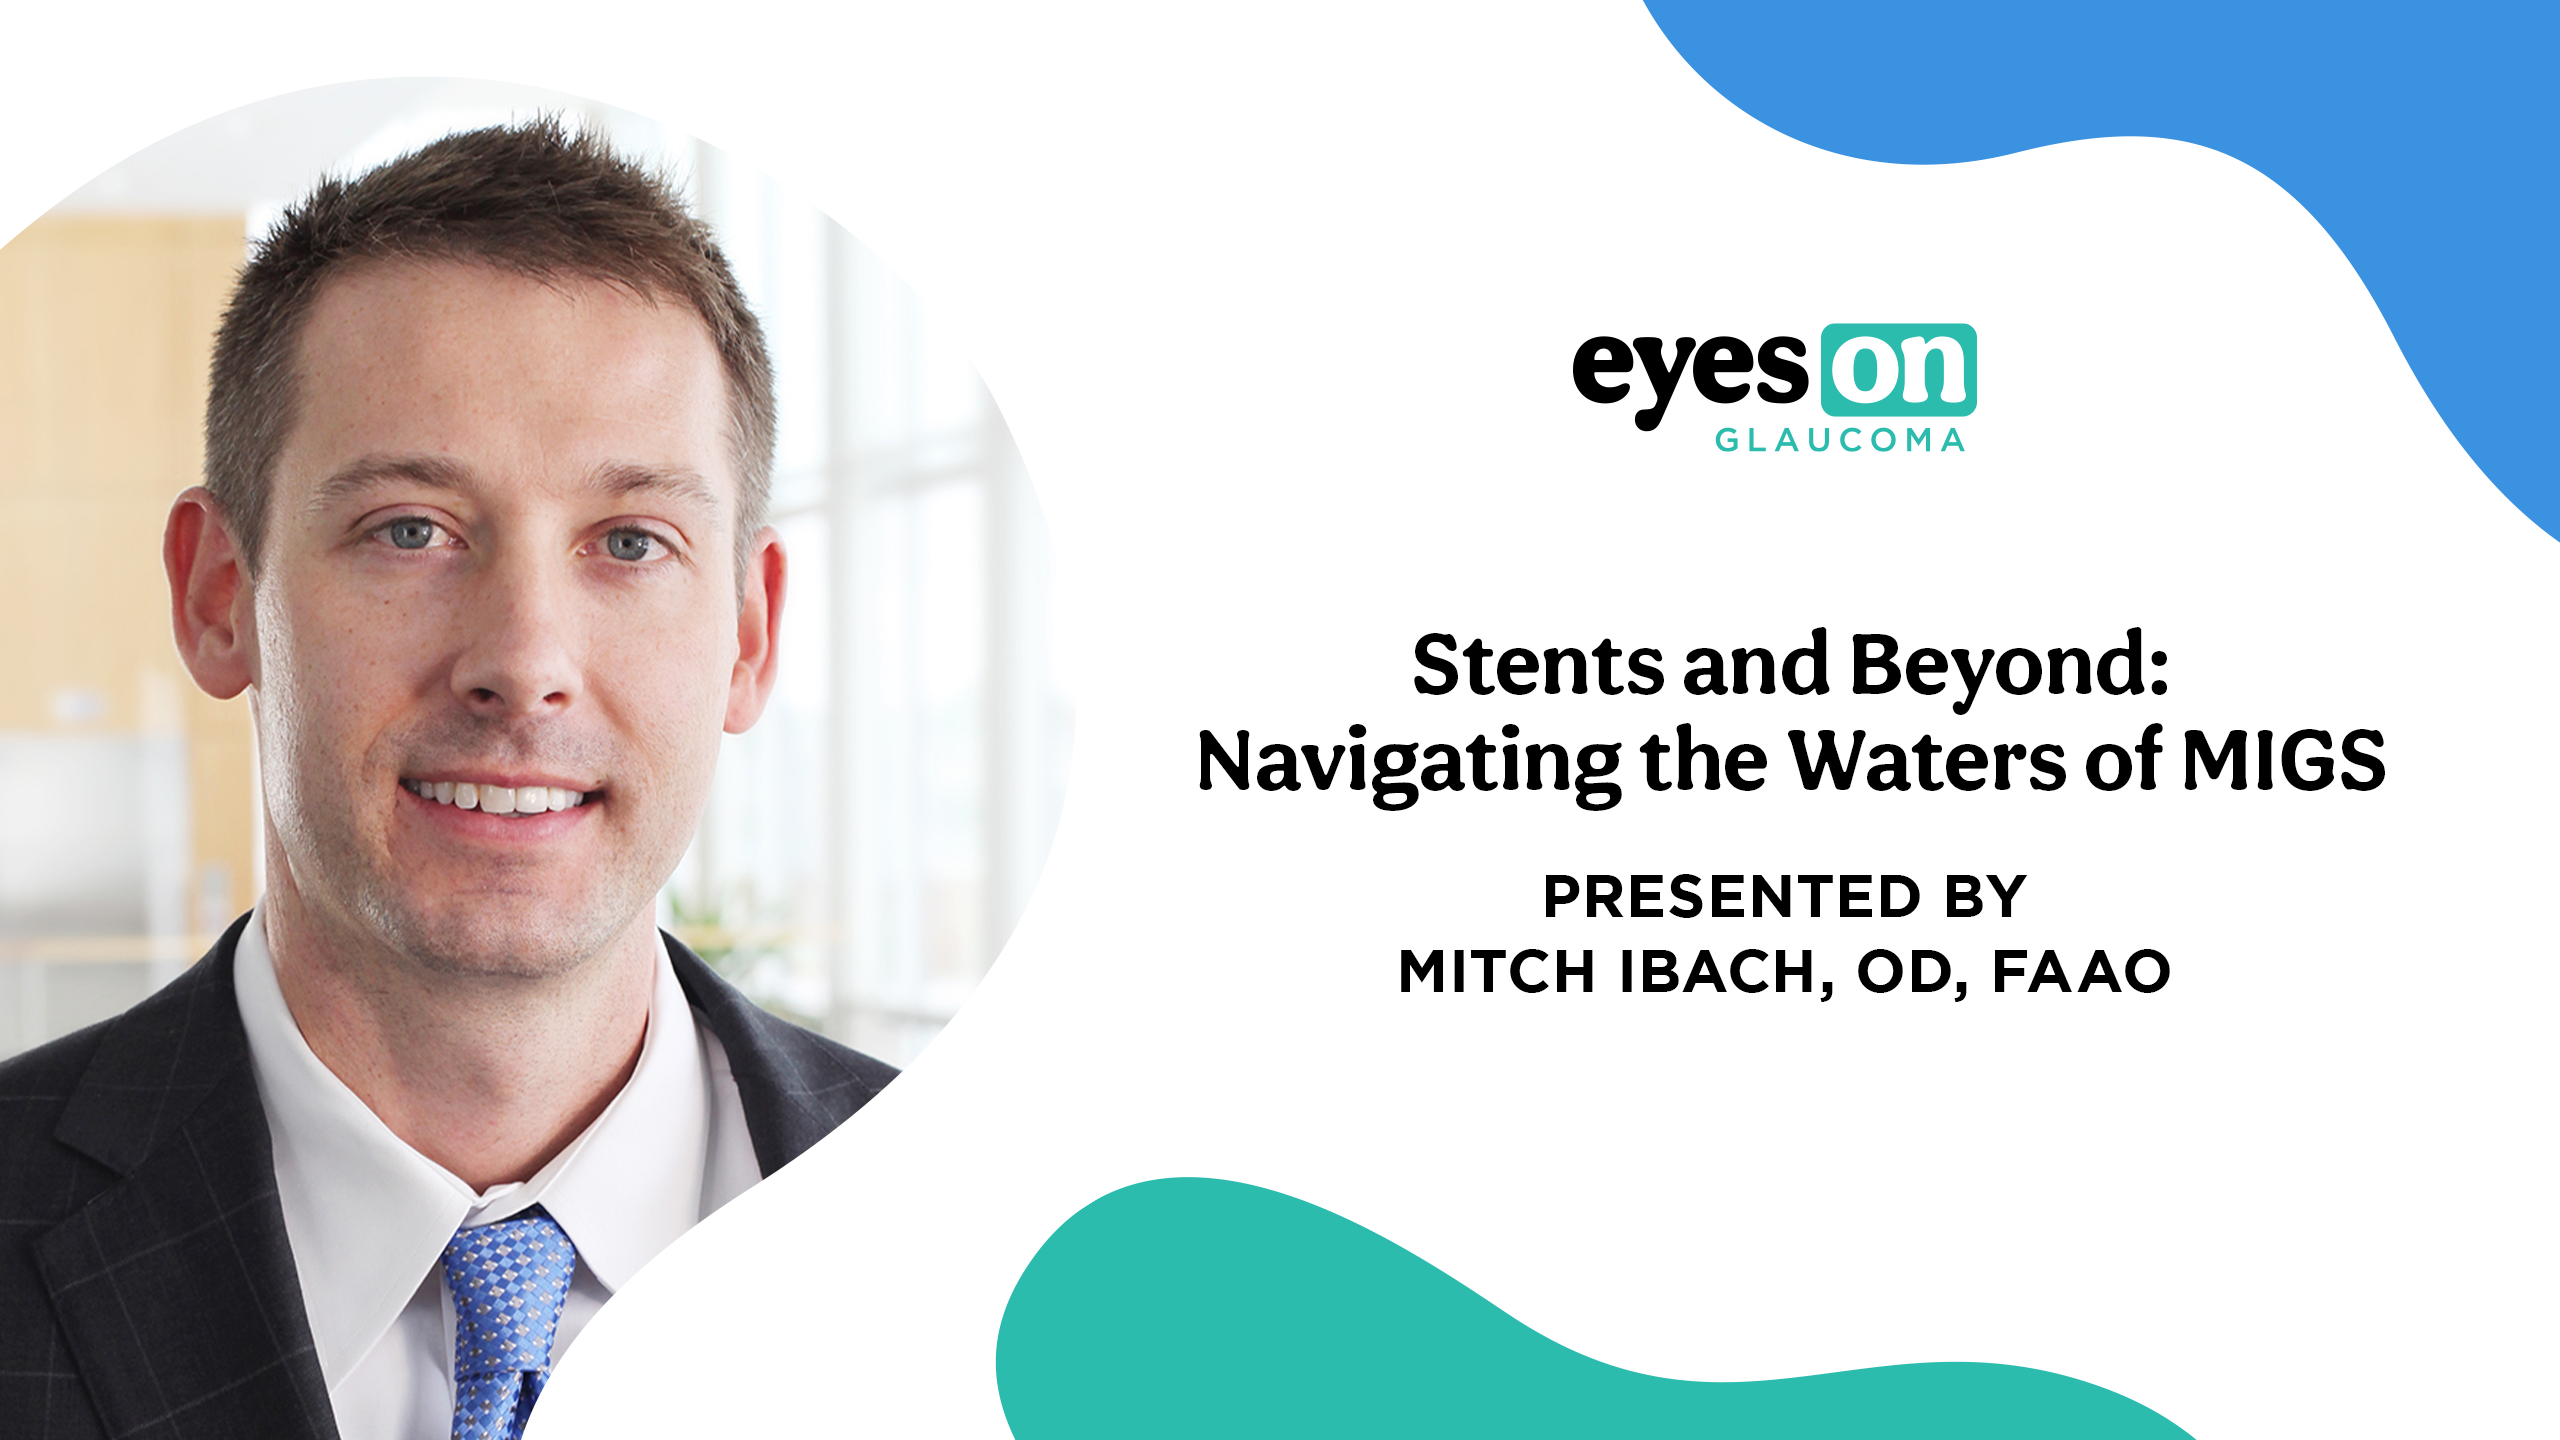 Stents and Beyond: Navigating the Waters of MIGS